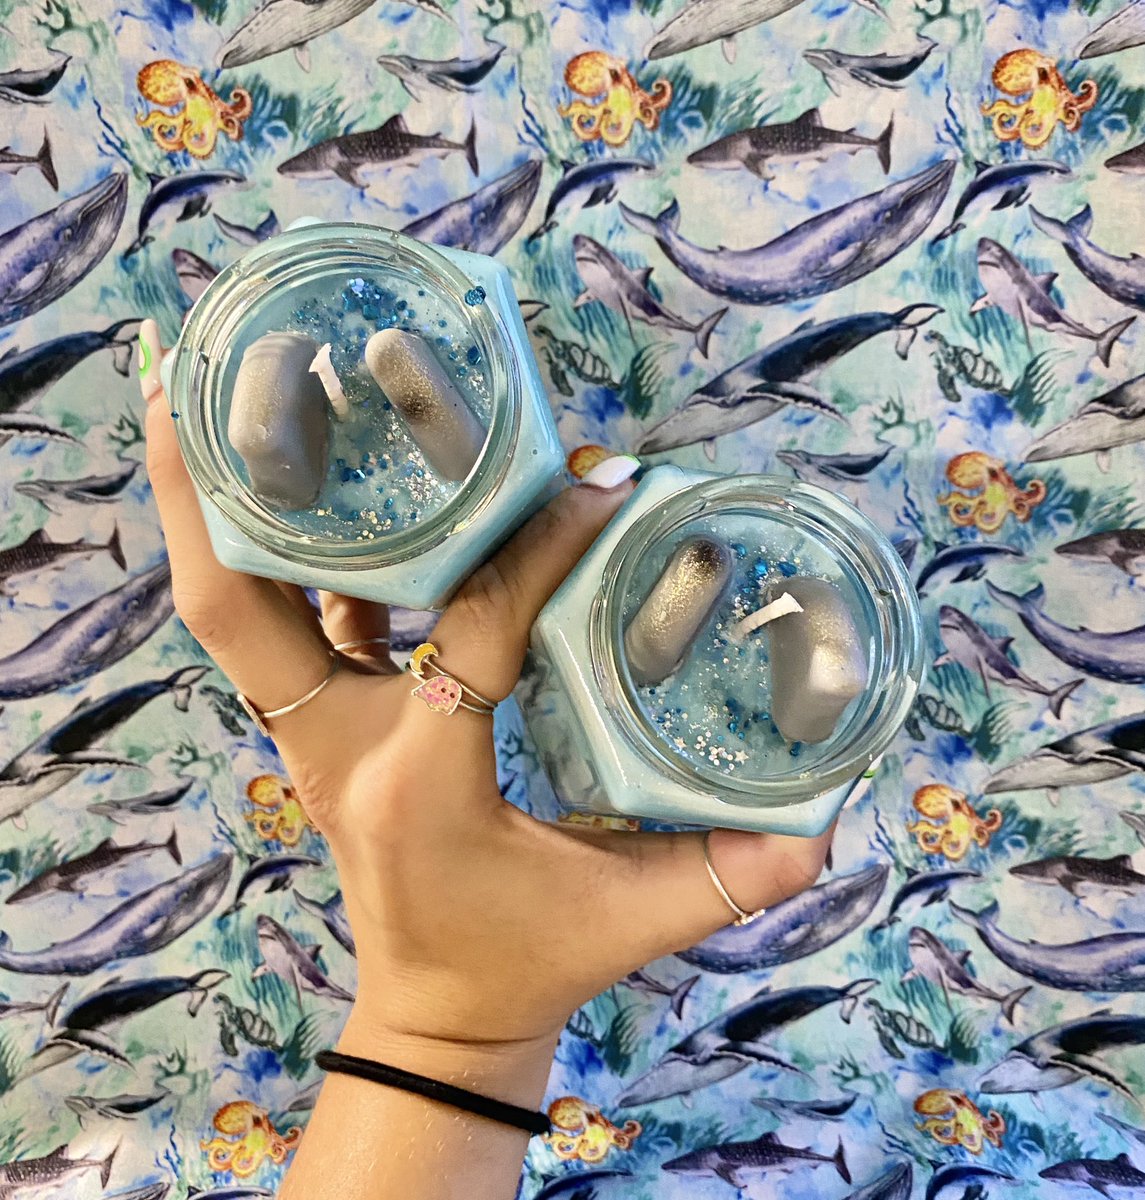 Sharks in the Water! 🦈🌊❤️ these beauties are 9oz & scented with fresh linen, they’ll be available in my beach collection this sunday 8/29 @ 4pm est! 🏝☀️🐳